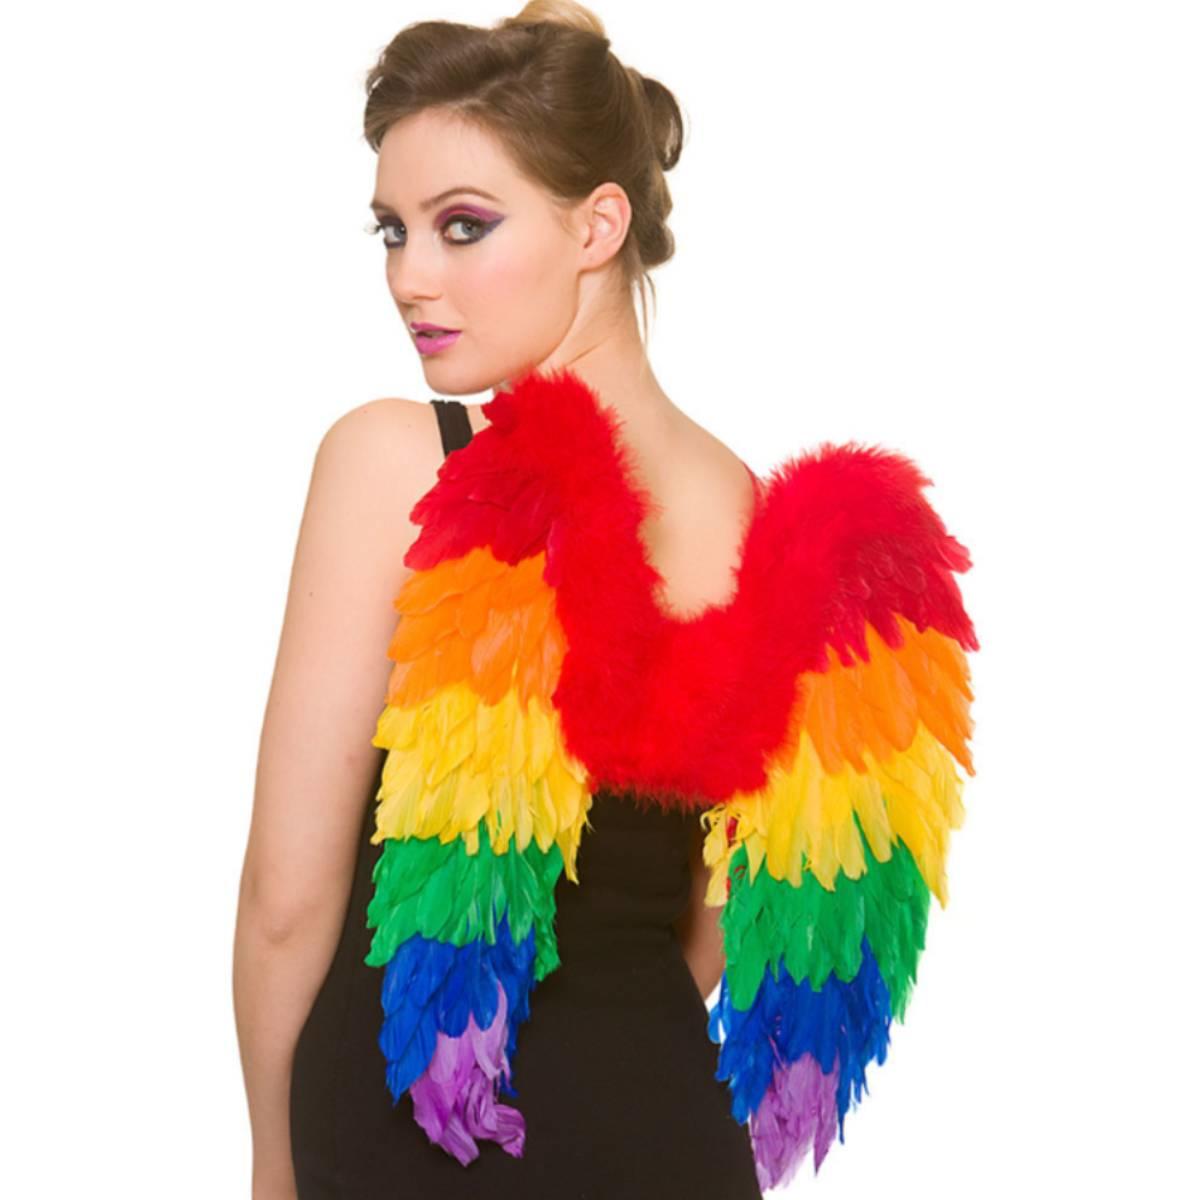 Rainbow Feather Wings 50cm for Pride and Festivals by Wicked AC-9045 available here at Karnival Costumes online party shop